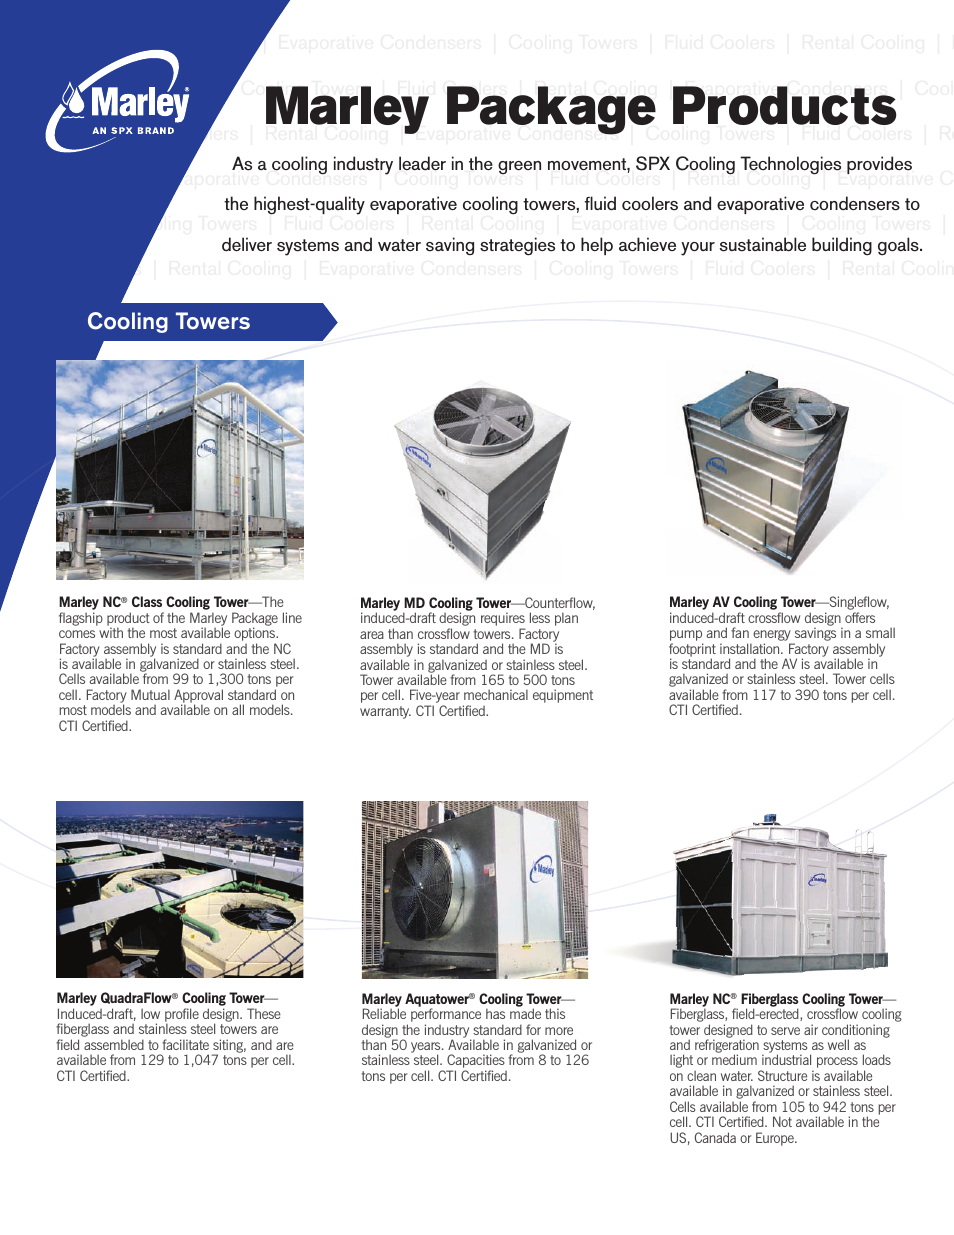 Class Cooling Tower